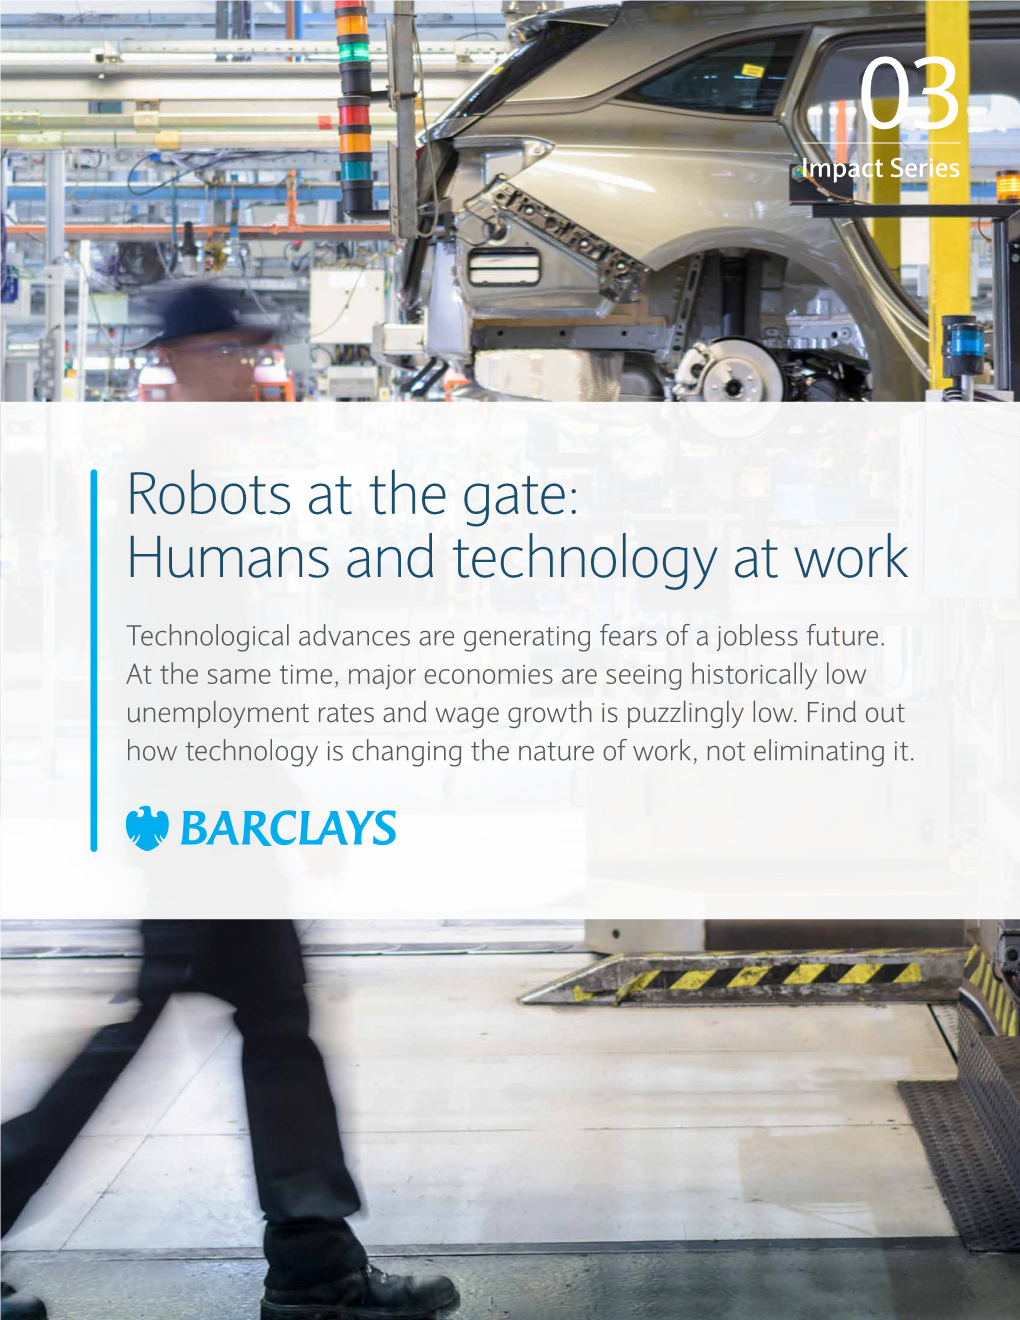 Robots at the Gate: Humans and Technology at Work